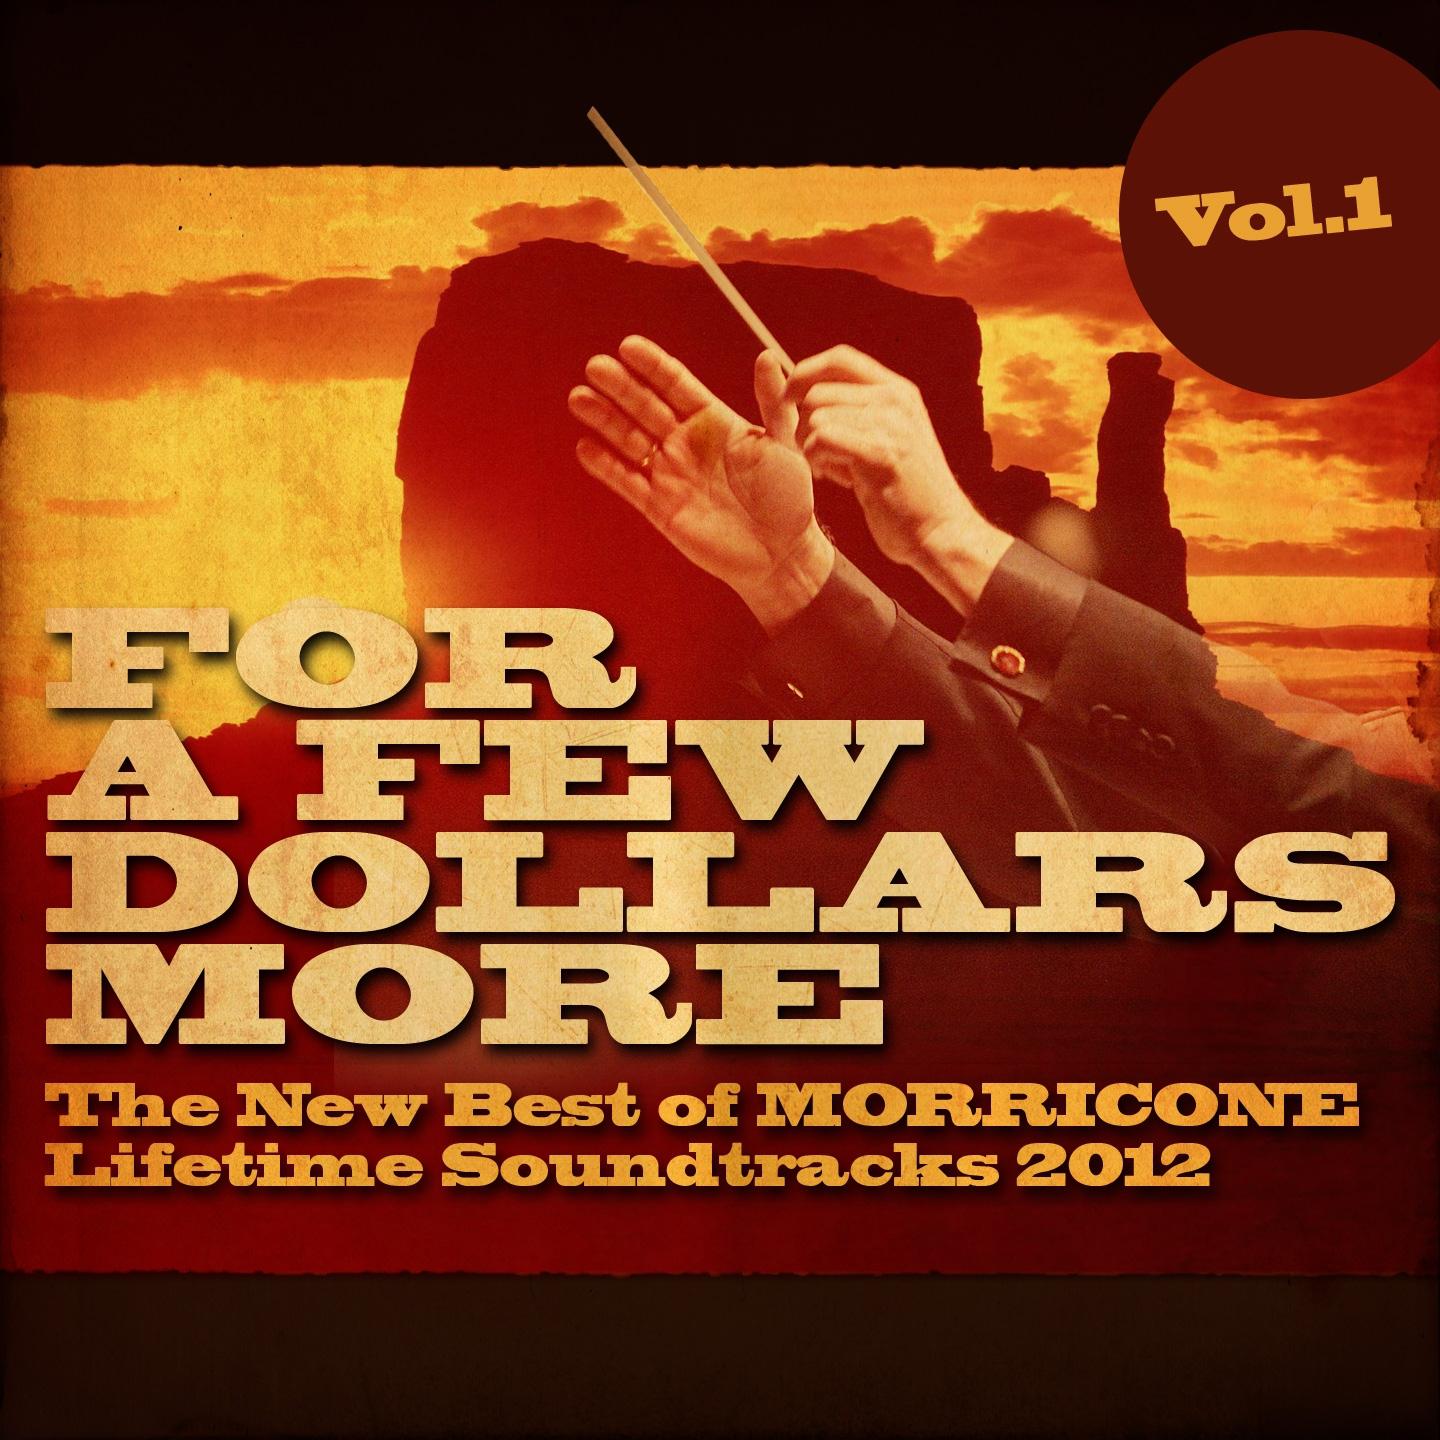 For a Few Dollars More, Vol. 1